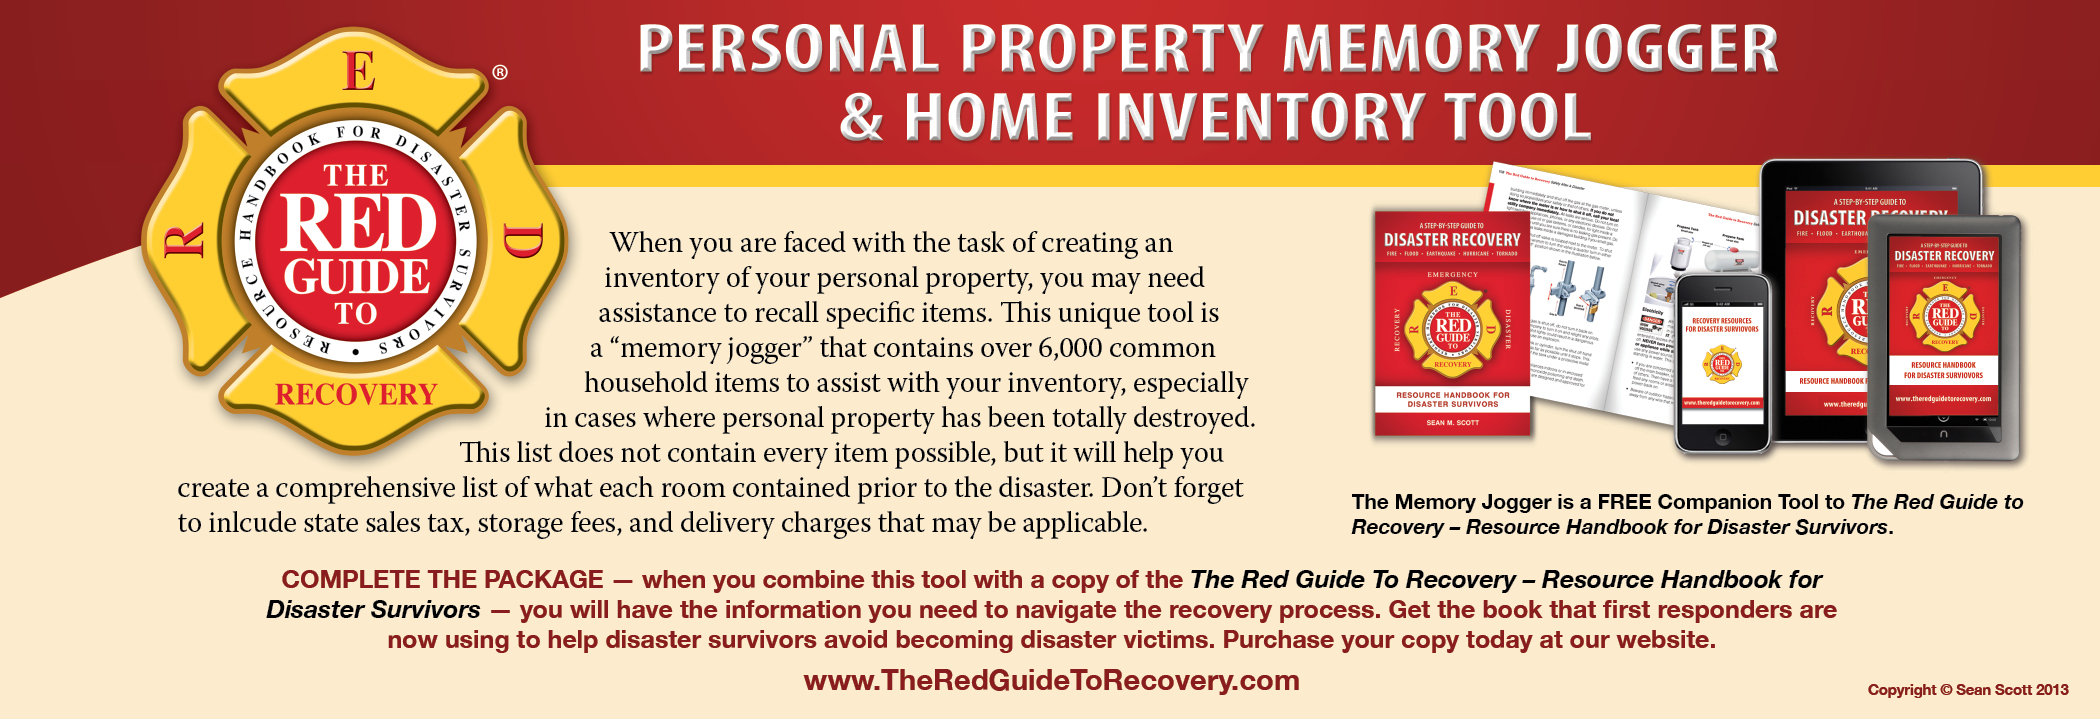 Home Inventory Tool